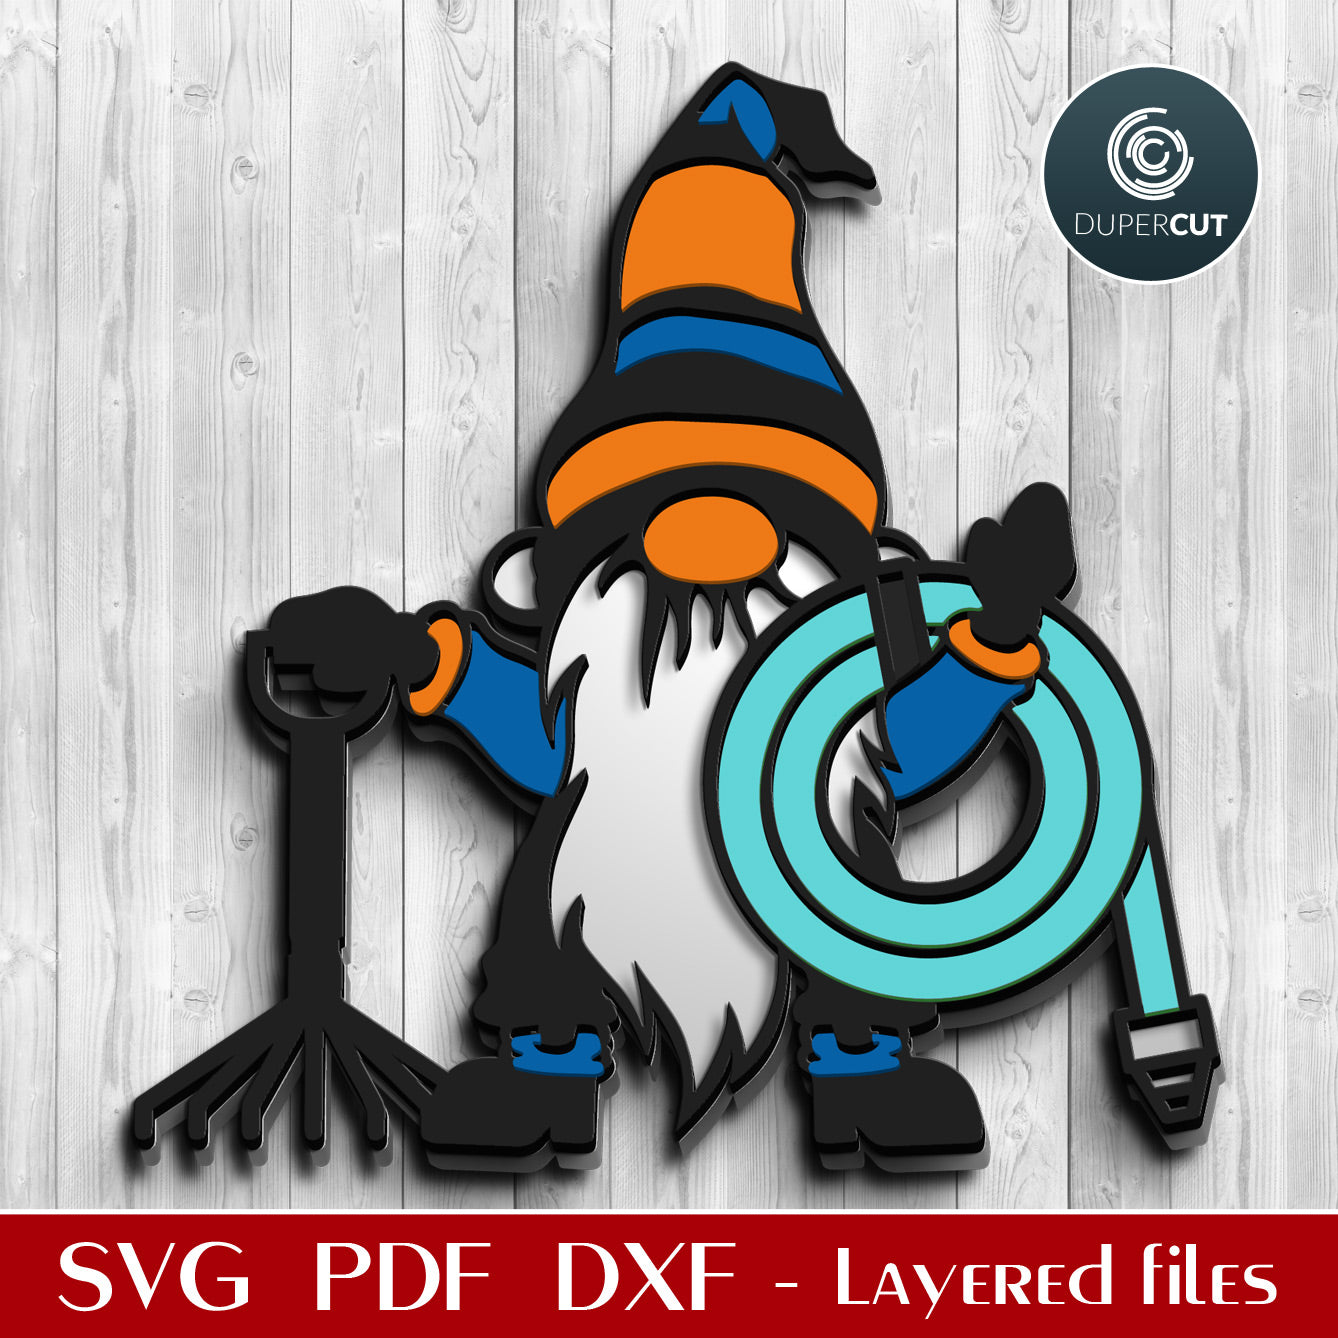 Garden gnome DIY yard decoration pattern - SVG DXF layered cutting files for Glowforge, Cricut, Silhouette cameo, CNC pattern by DuperCut.com